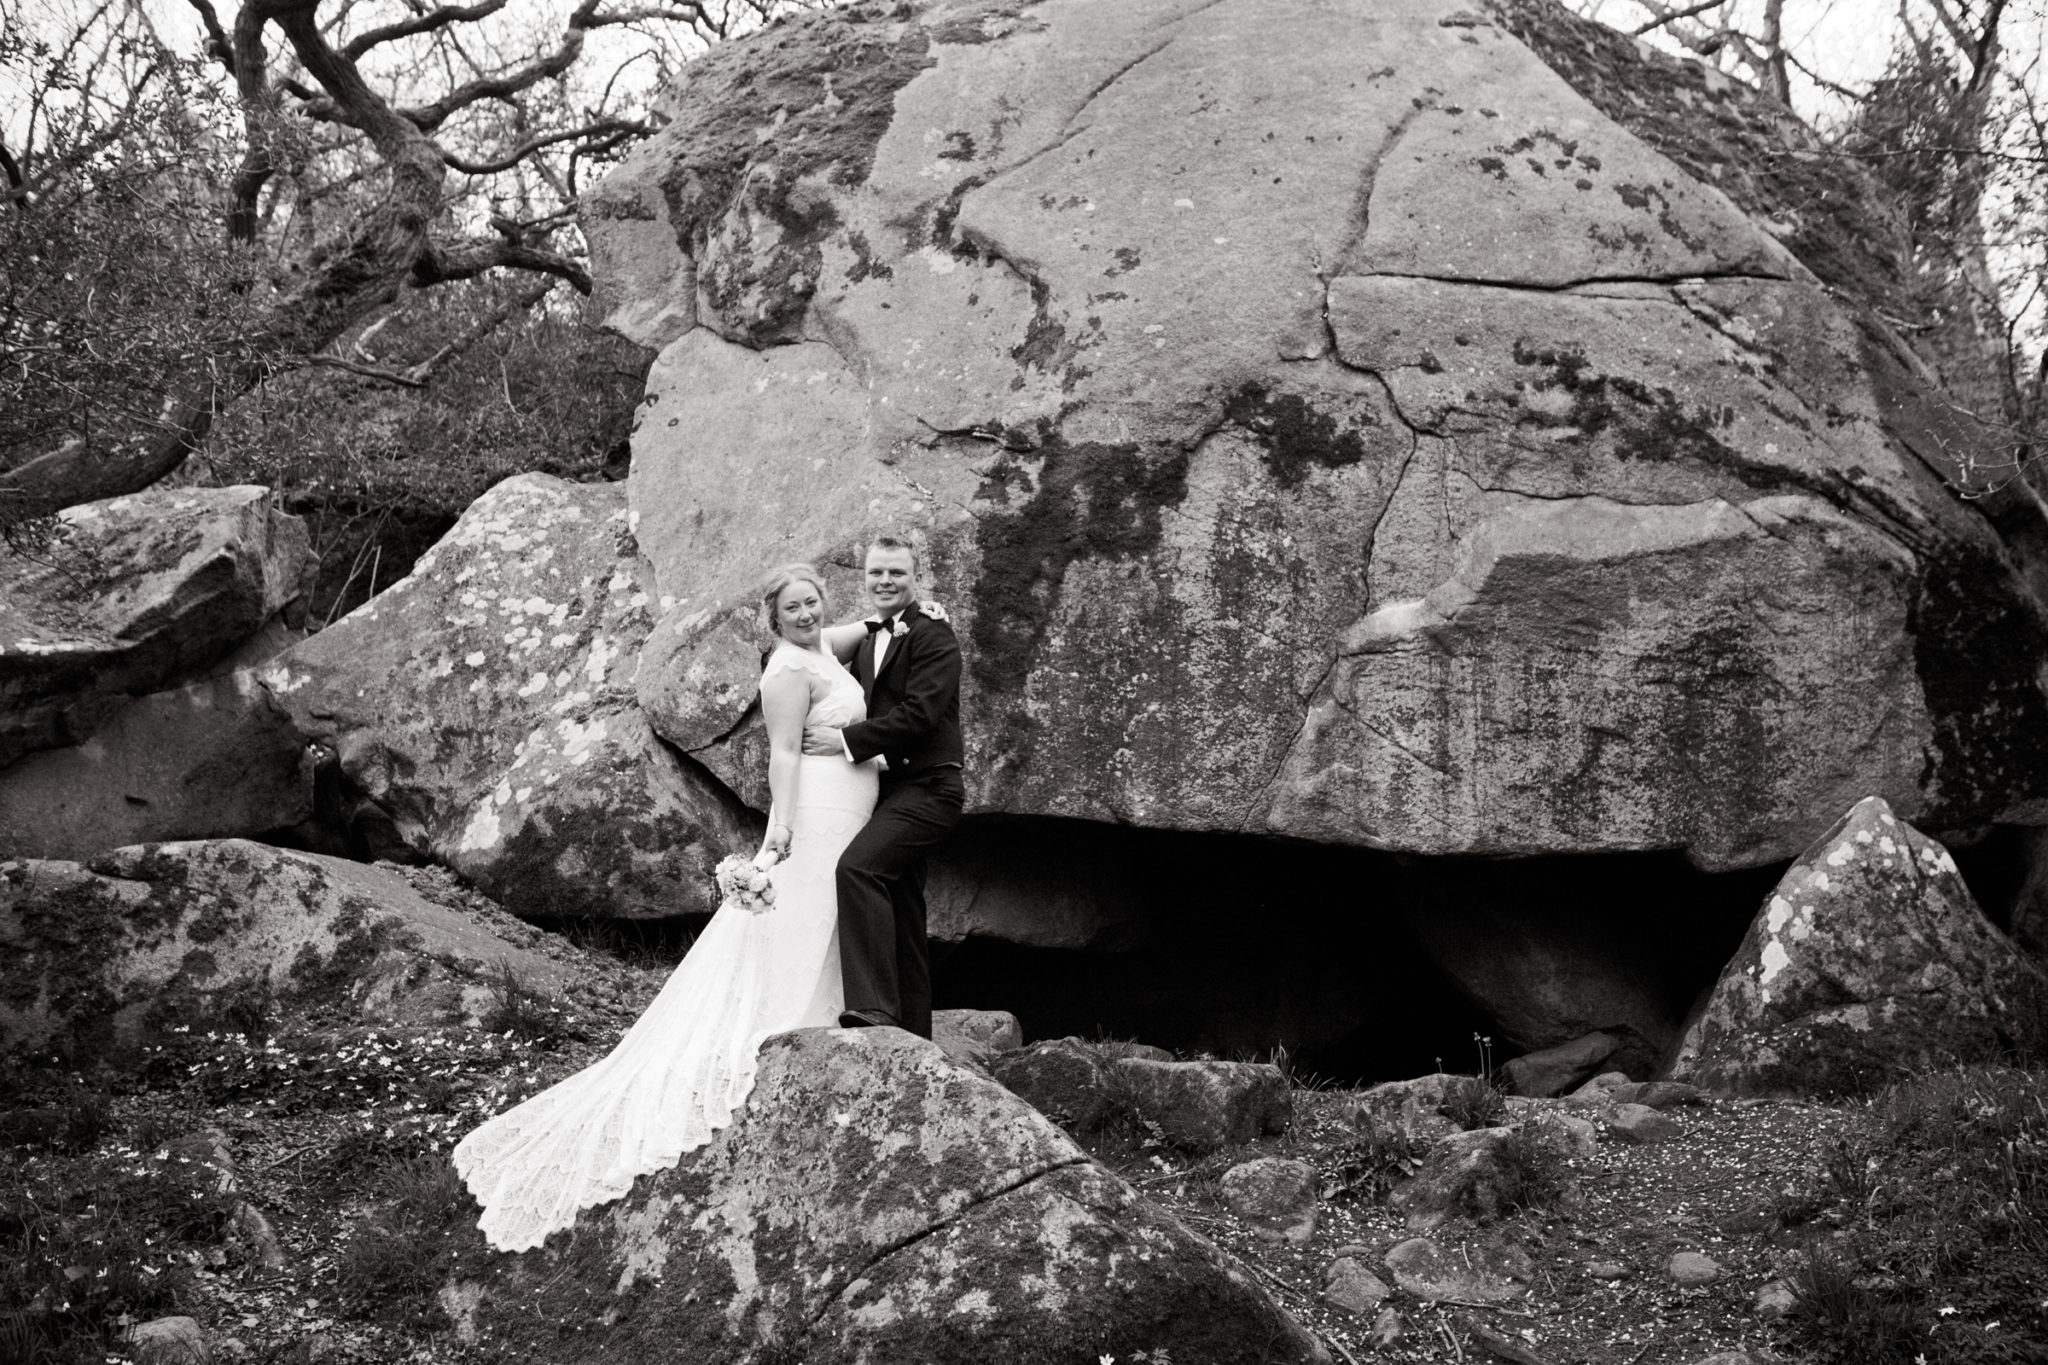 Bride and groom pose in front of cliffs on Bornholm